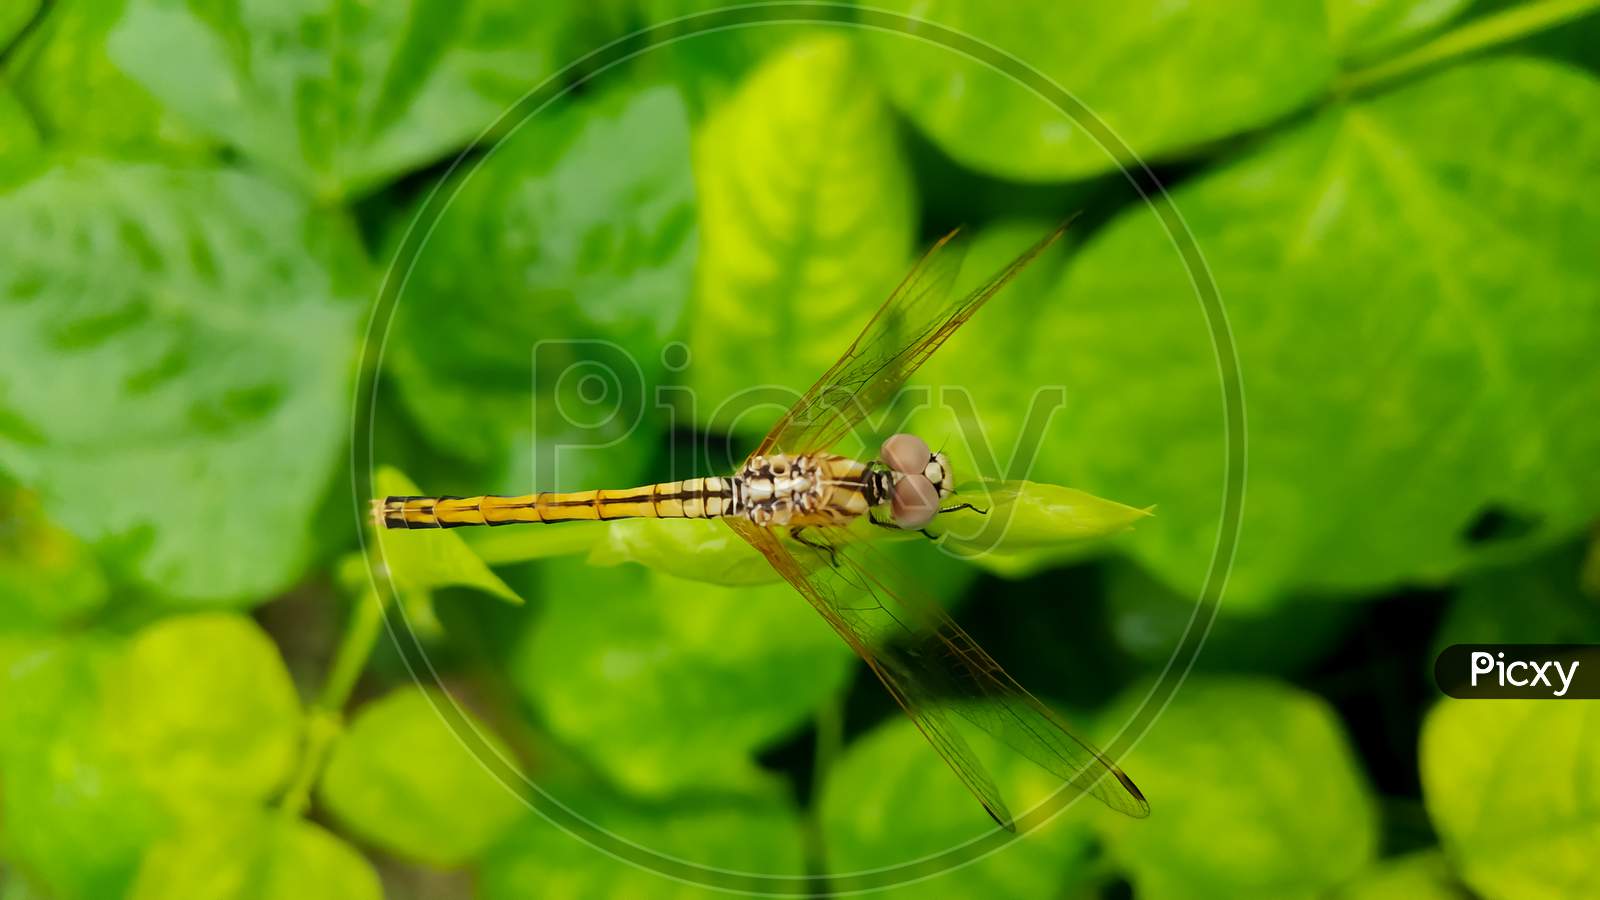 Dragonfly on the green Leaf